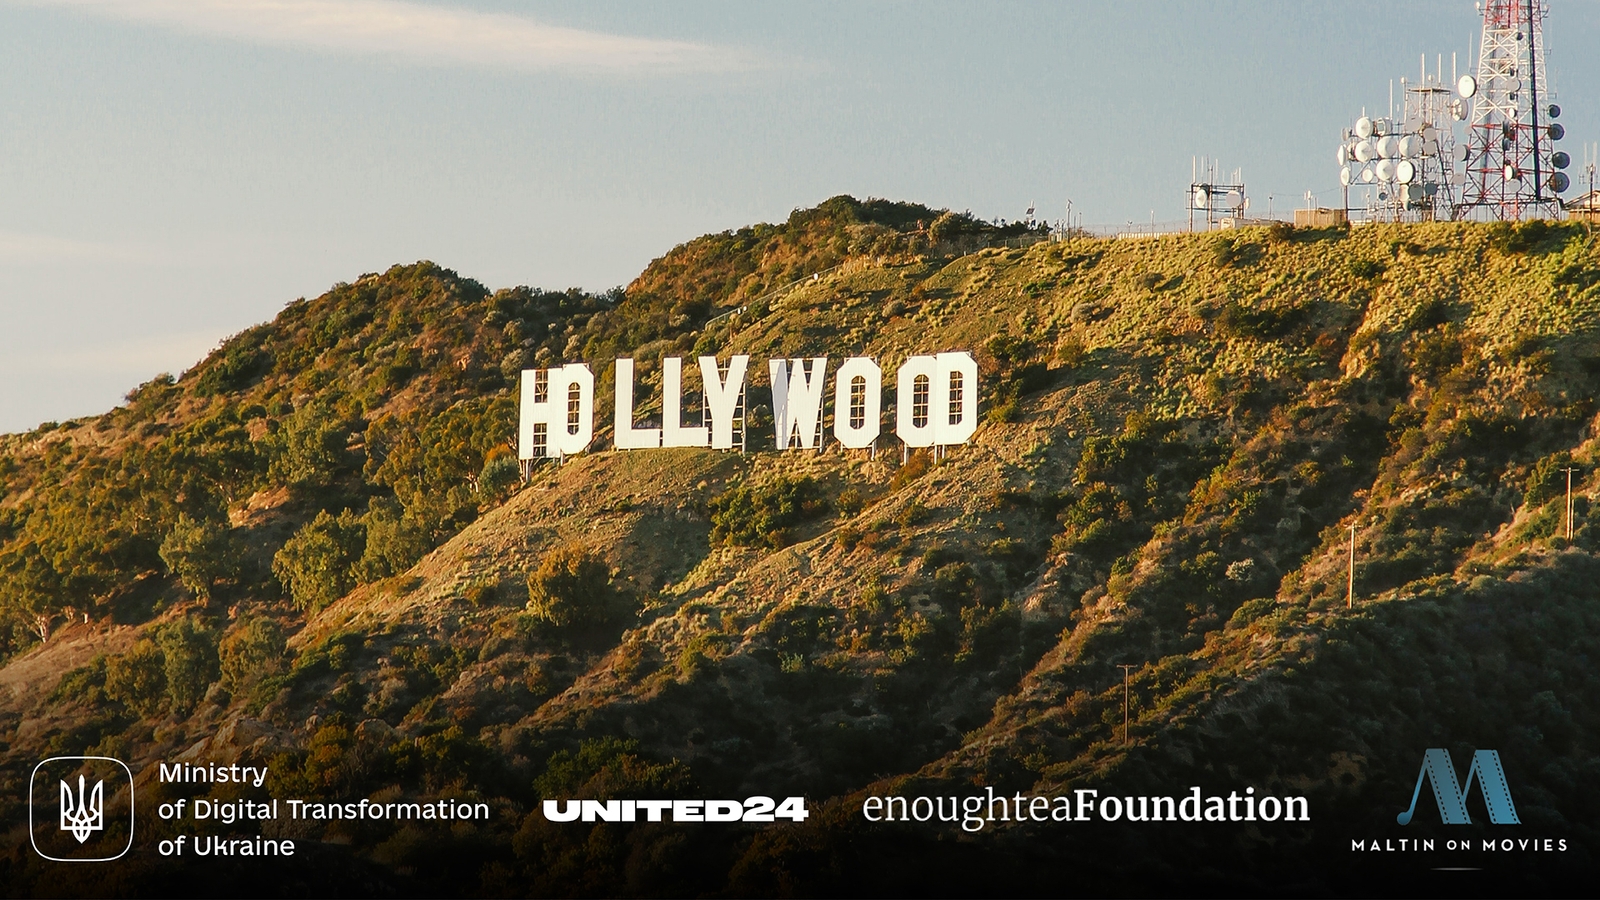 EnoughTea Foundation Organizes a Charity Event in Hollywood with the Support of the Ministry of Digital Transformation and UNITED24